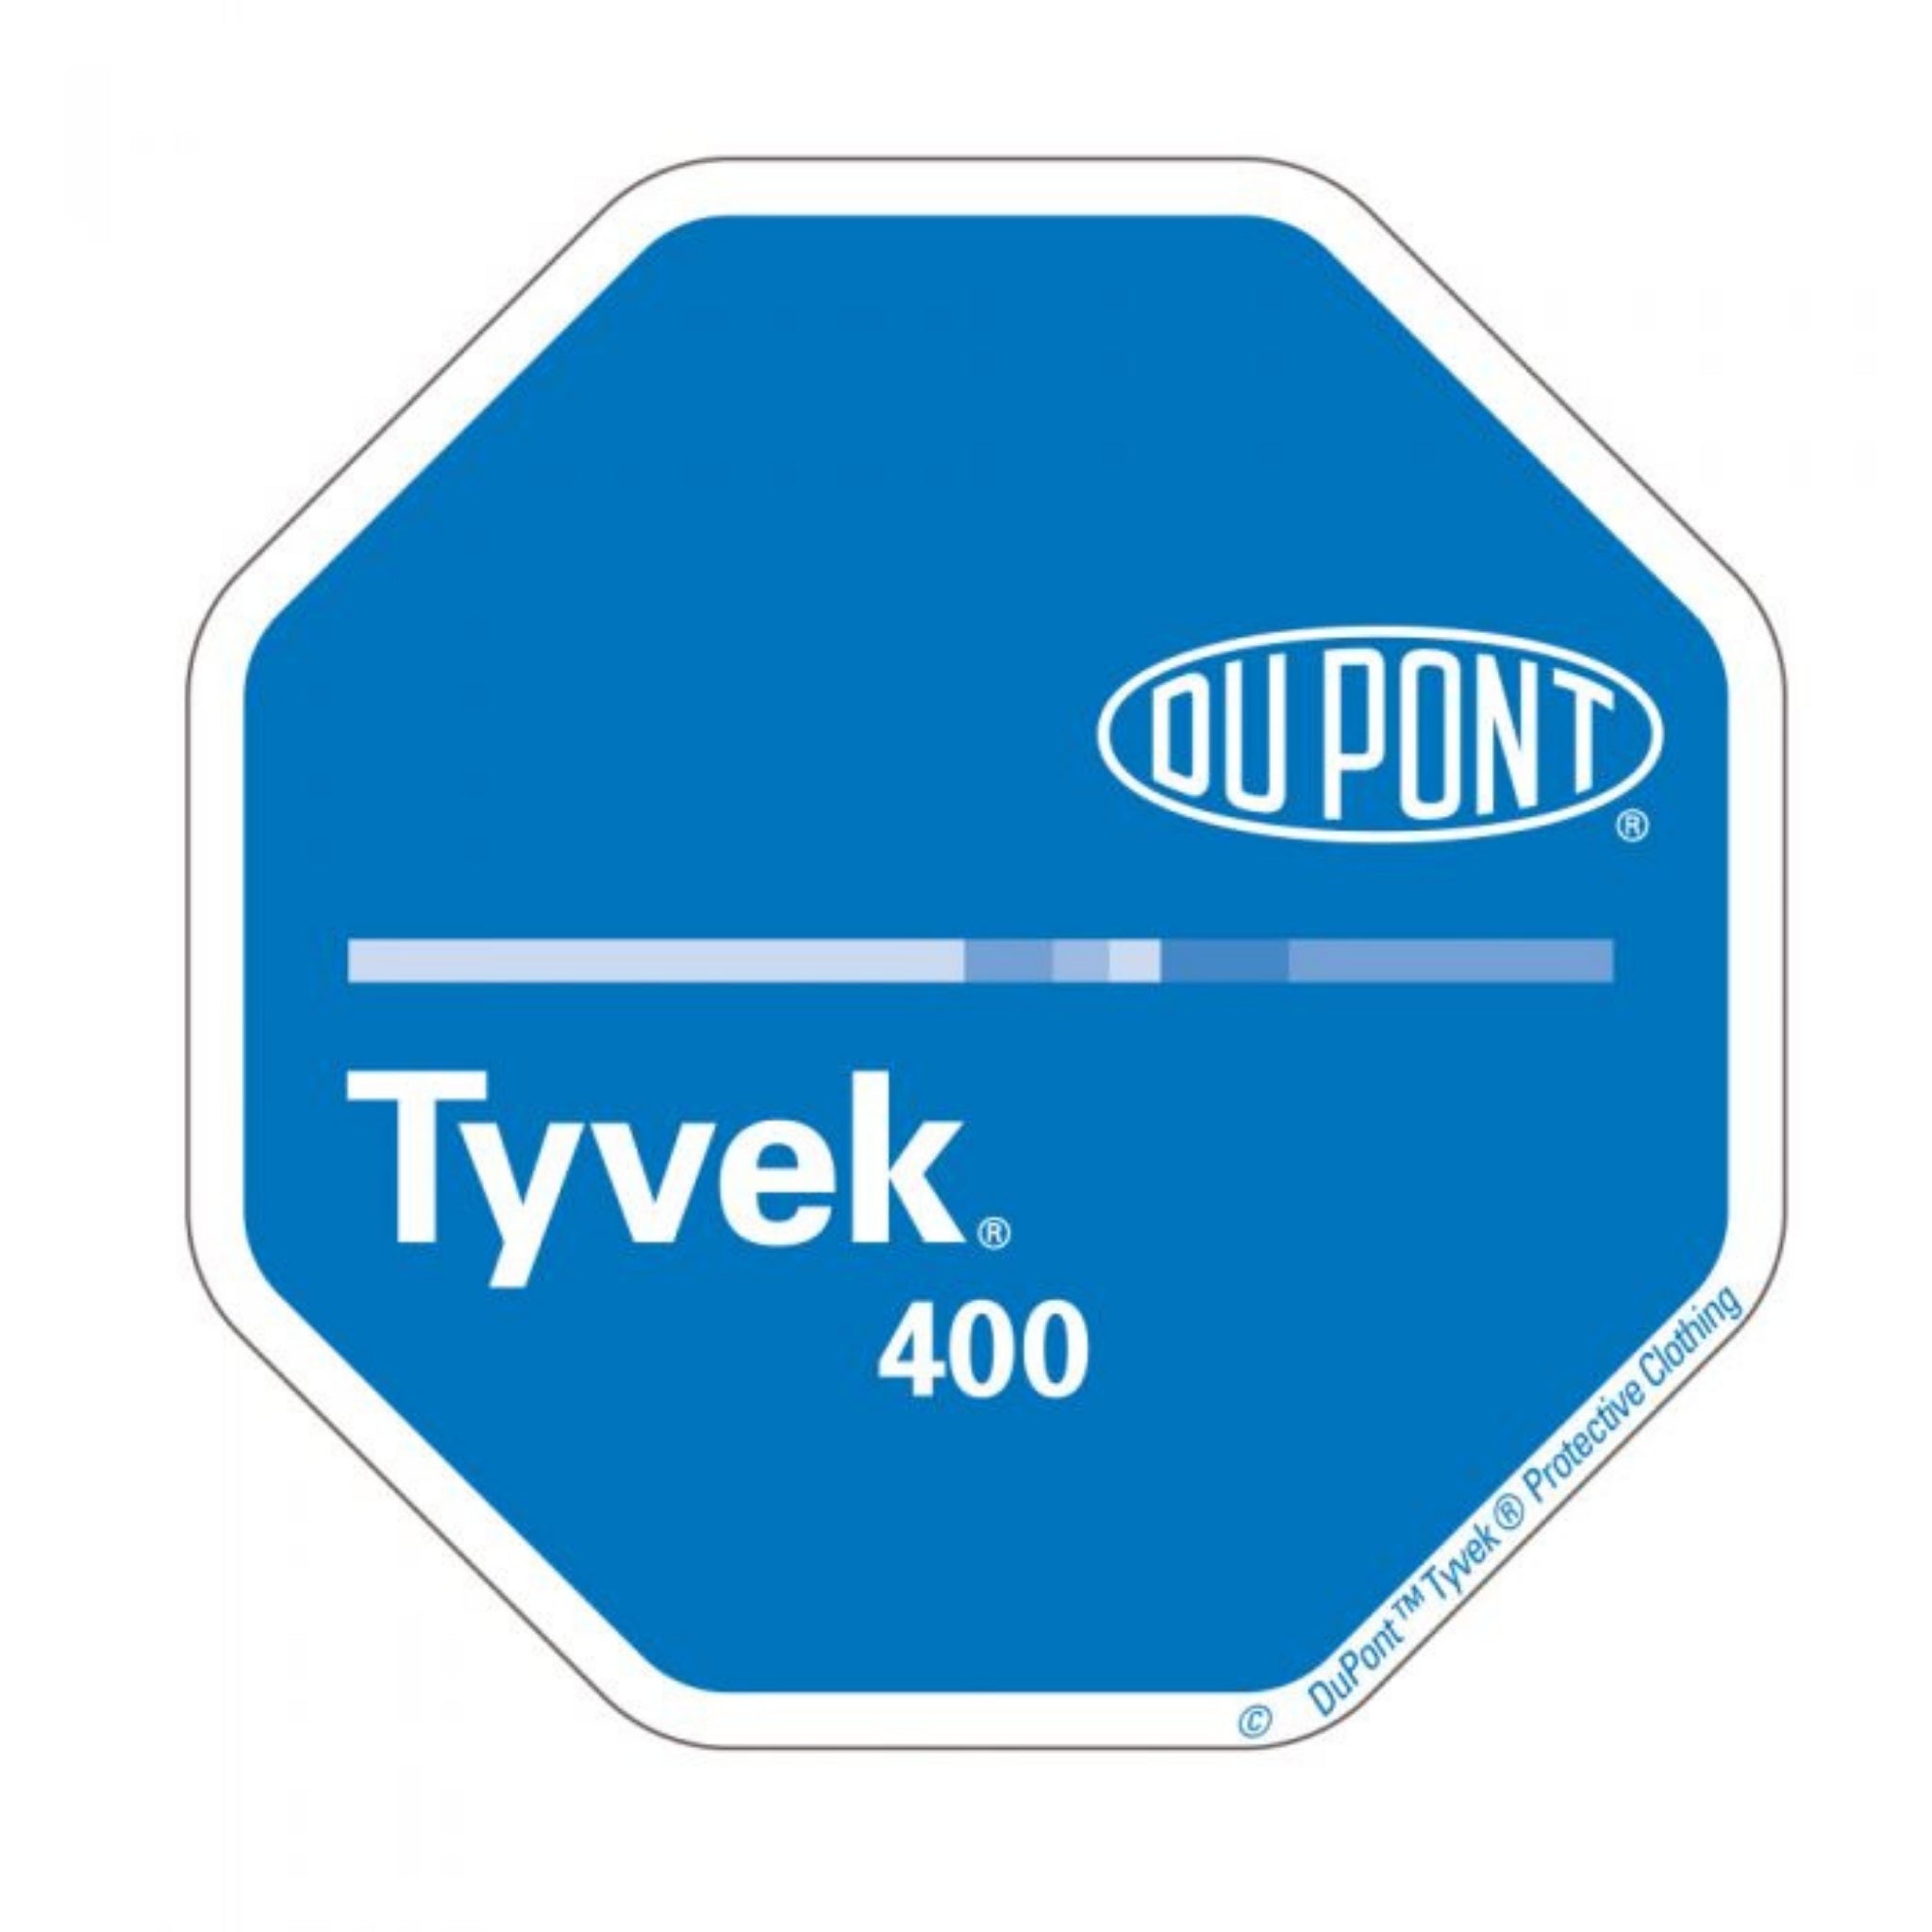 DuPont Tyvek TY454SWH0-18" Boot Covers with Elastic Top, White, One Size Fits Most, 50 Pairs